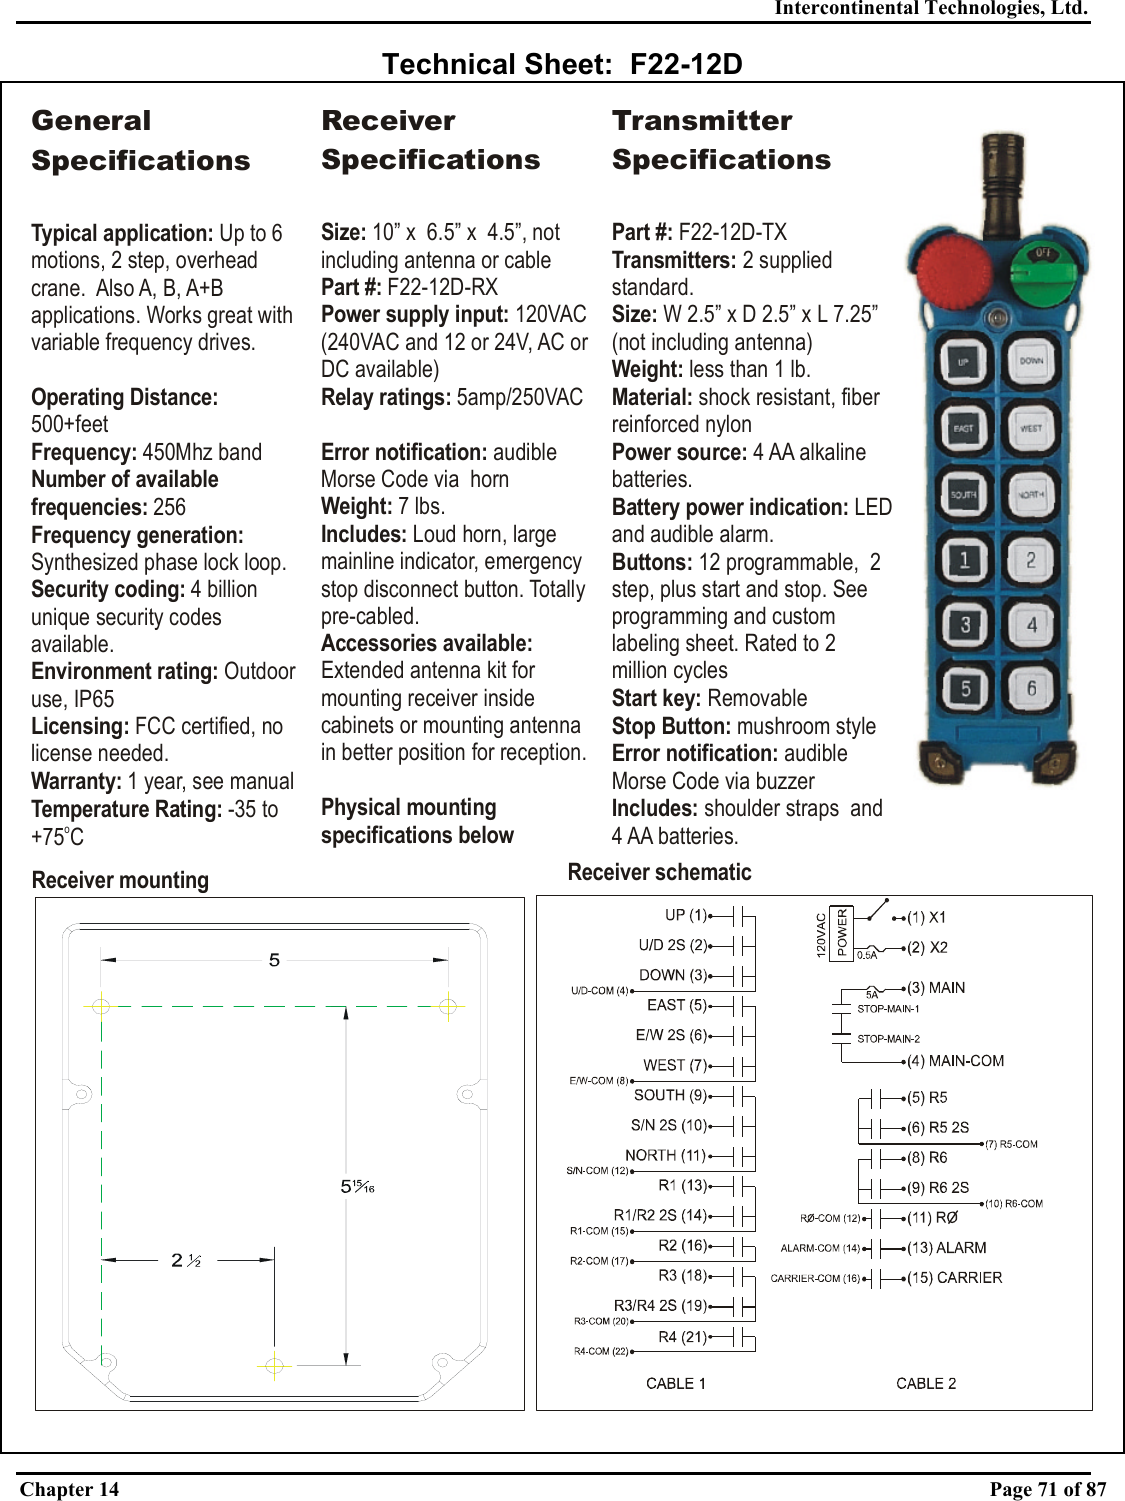 Intercontinental Technologies, Ltd. Chapter 14    Page 71 of 87  Technical Sheet:  F22-12D Receiver mounting Receiver schematicGeneral SpecificationsTypical application: Operating Distance:Frequency: Number of available frequencies:Frequency generation: Security coding: Environment rating: Licensing:Warranty:Up to 6 motions, 2 step, overhead crane.  Also A, B, A+B applications. Works great with variable frequency drives. 500+feet450Mhz band 256Synthesized phase lock loop.4 billion unique security codes available.Outdoor use, IP65 FCC certified, no license needed. 1 year, see manualTemperature Rating: -35 to +75 CoReceiver SpecificationsSize: 10” x  6.5” x  4.5”, not including antenna or cableand 12 or 24V, AC or DC available)Part #:Power supply input: Relay ratings: Error notification: Weight: Includes: Accessories available: Physical mounting specifications below F22-12D-RX120VAC (240VAC  5amp/250VACaudible Morse Code via  horn7 lbs.Loud horn, large mainline indicator, emergency stop disconnect button. Totally pre-cabled.Extended antenna kit for mounting receiver inside cabinets or mounting antenna in better position for reception.Transmitter SpecificationsPart #: Transmitters: Size: Weight:  Material: Power source: Buttons: Start key: Stop Button: ication: Includes: F22-12D-TX2 supplied standard.W 2.5” x D 2.5” x less than 1 lb.shock resistant, fiber reinforced nylon4 AA alkaline batteries.12 programmable,  2 step, plus start and stop. See programming and custom labeling sheet. Rated to 2 million cyclesRemovablemushroom styleaudible Morse Code via buzzershoulder straps  and 4 AA batteries.L 7.25” (not including antenna)LED and audible alarm.Battery power indication: Error notif 